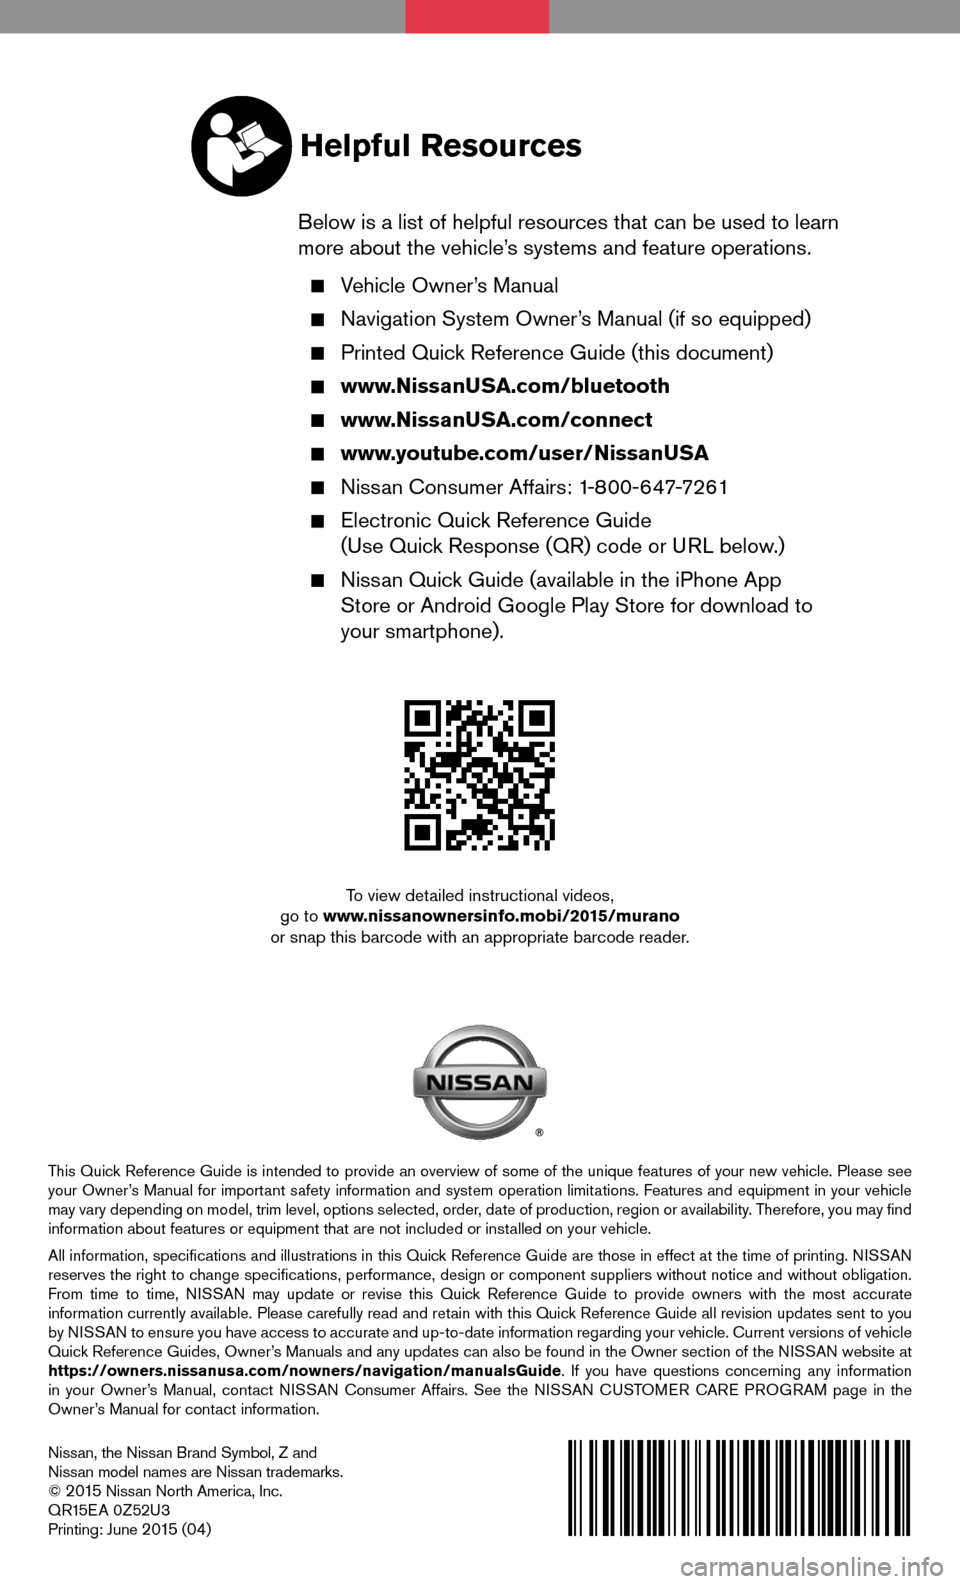 NISSAN MURANO 2015 3.G Quick Reference Guide Nissan, the Nissan Brand Symbol, Z and Nissan model names are Nissan trademarks.© 2 015 Nissan North America, Inc.QR15EA 0Z52U3Printing: June 2 015 (04)
To view detailed instructional videos, go to w